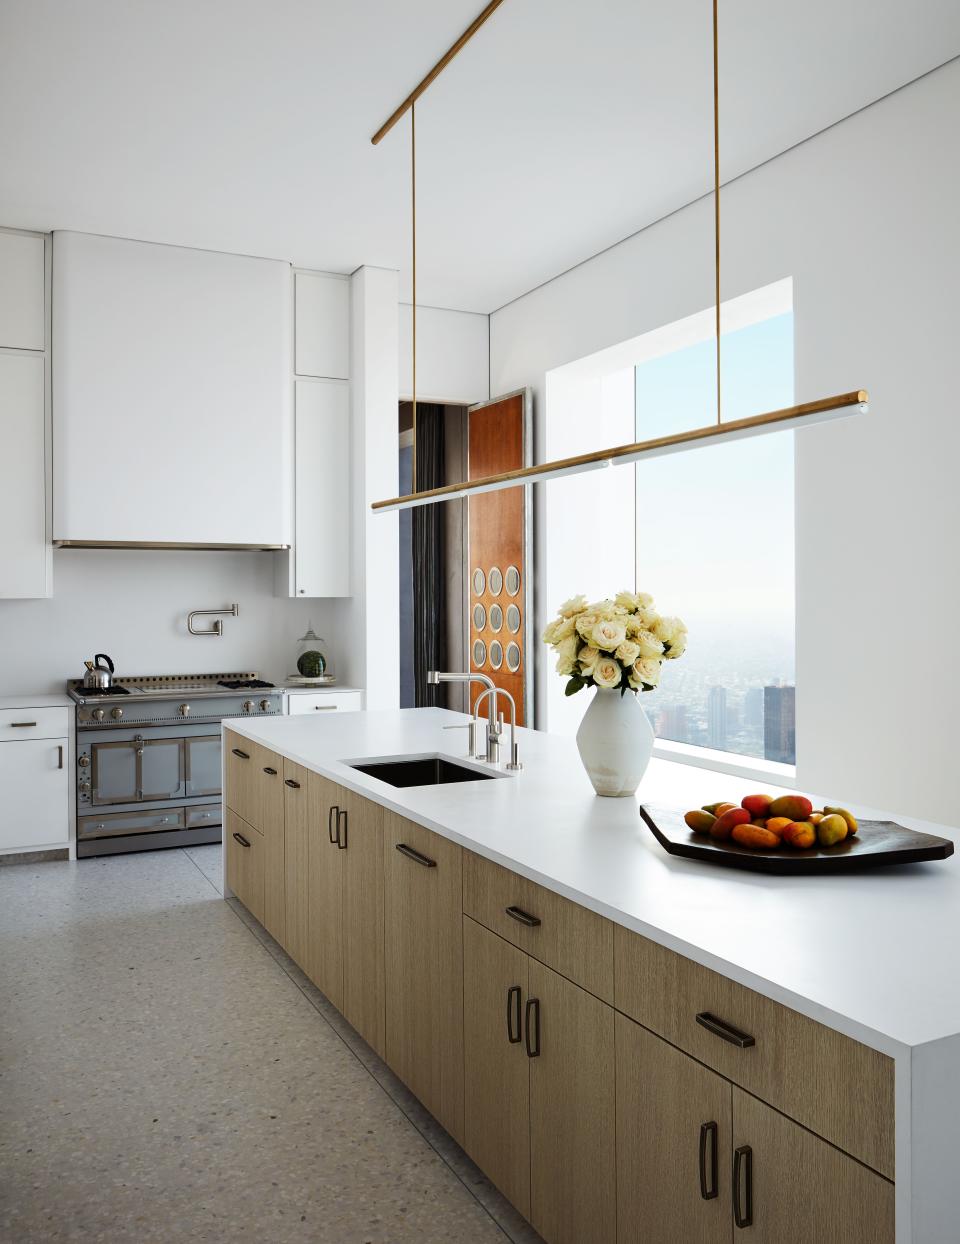 A Michael Anastassiades light hangs above a kitchen island with a Compac quartz countertop and cabinets of bleached and stained white oak. La Cornue range, Dornbracht fixtures, and H. Theophile pewter hardware.